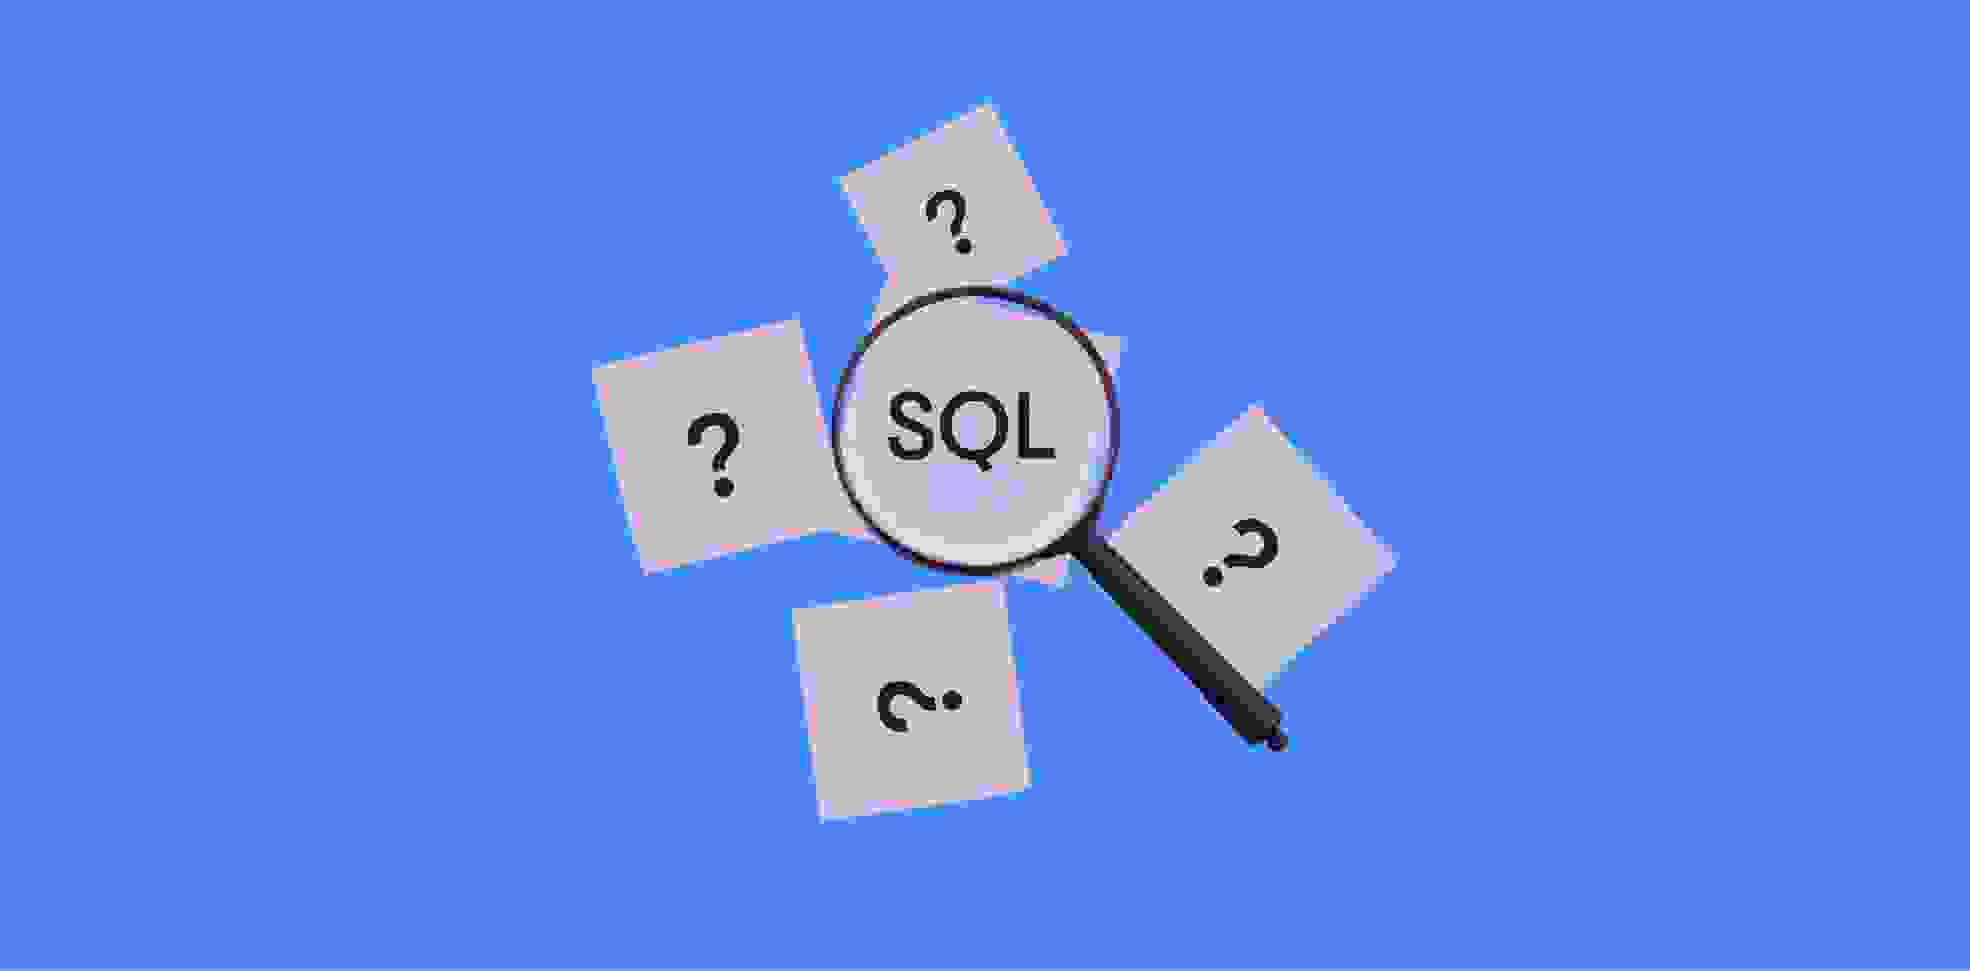 cards with symbols of questions and SQL under a magnifying glass on a blue background